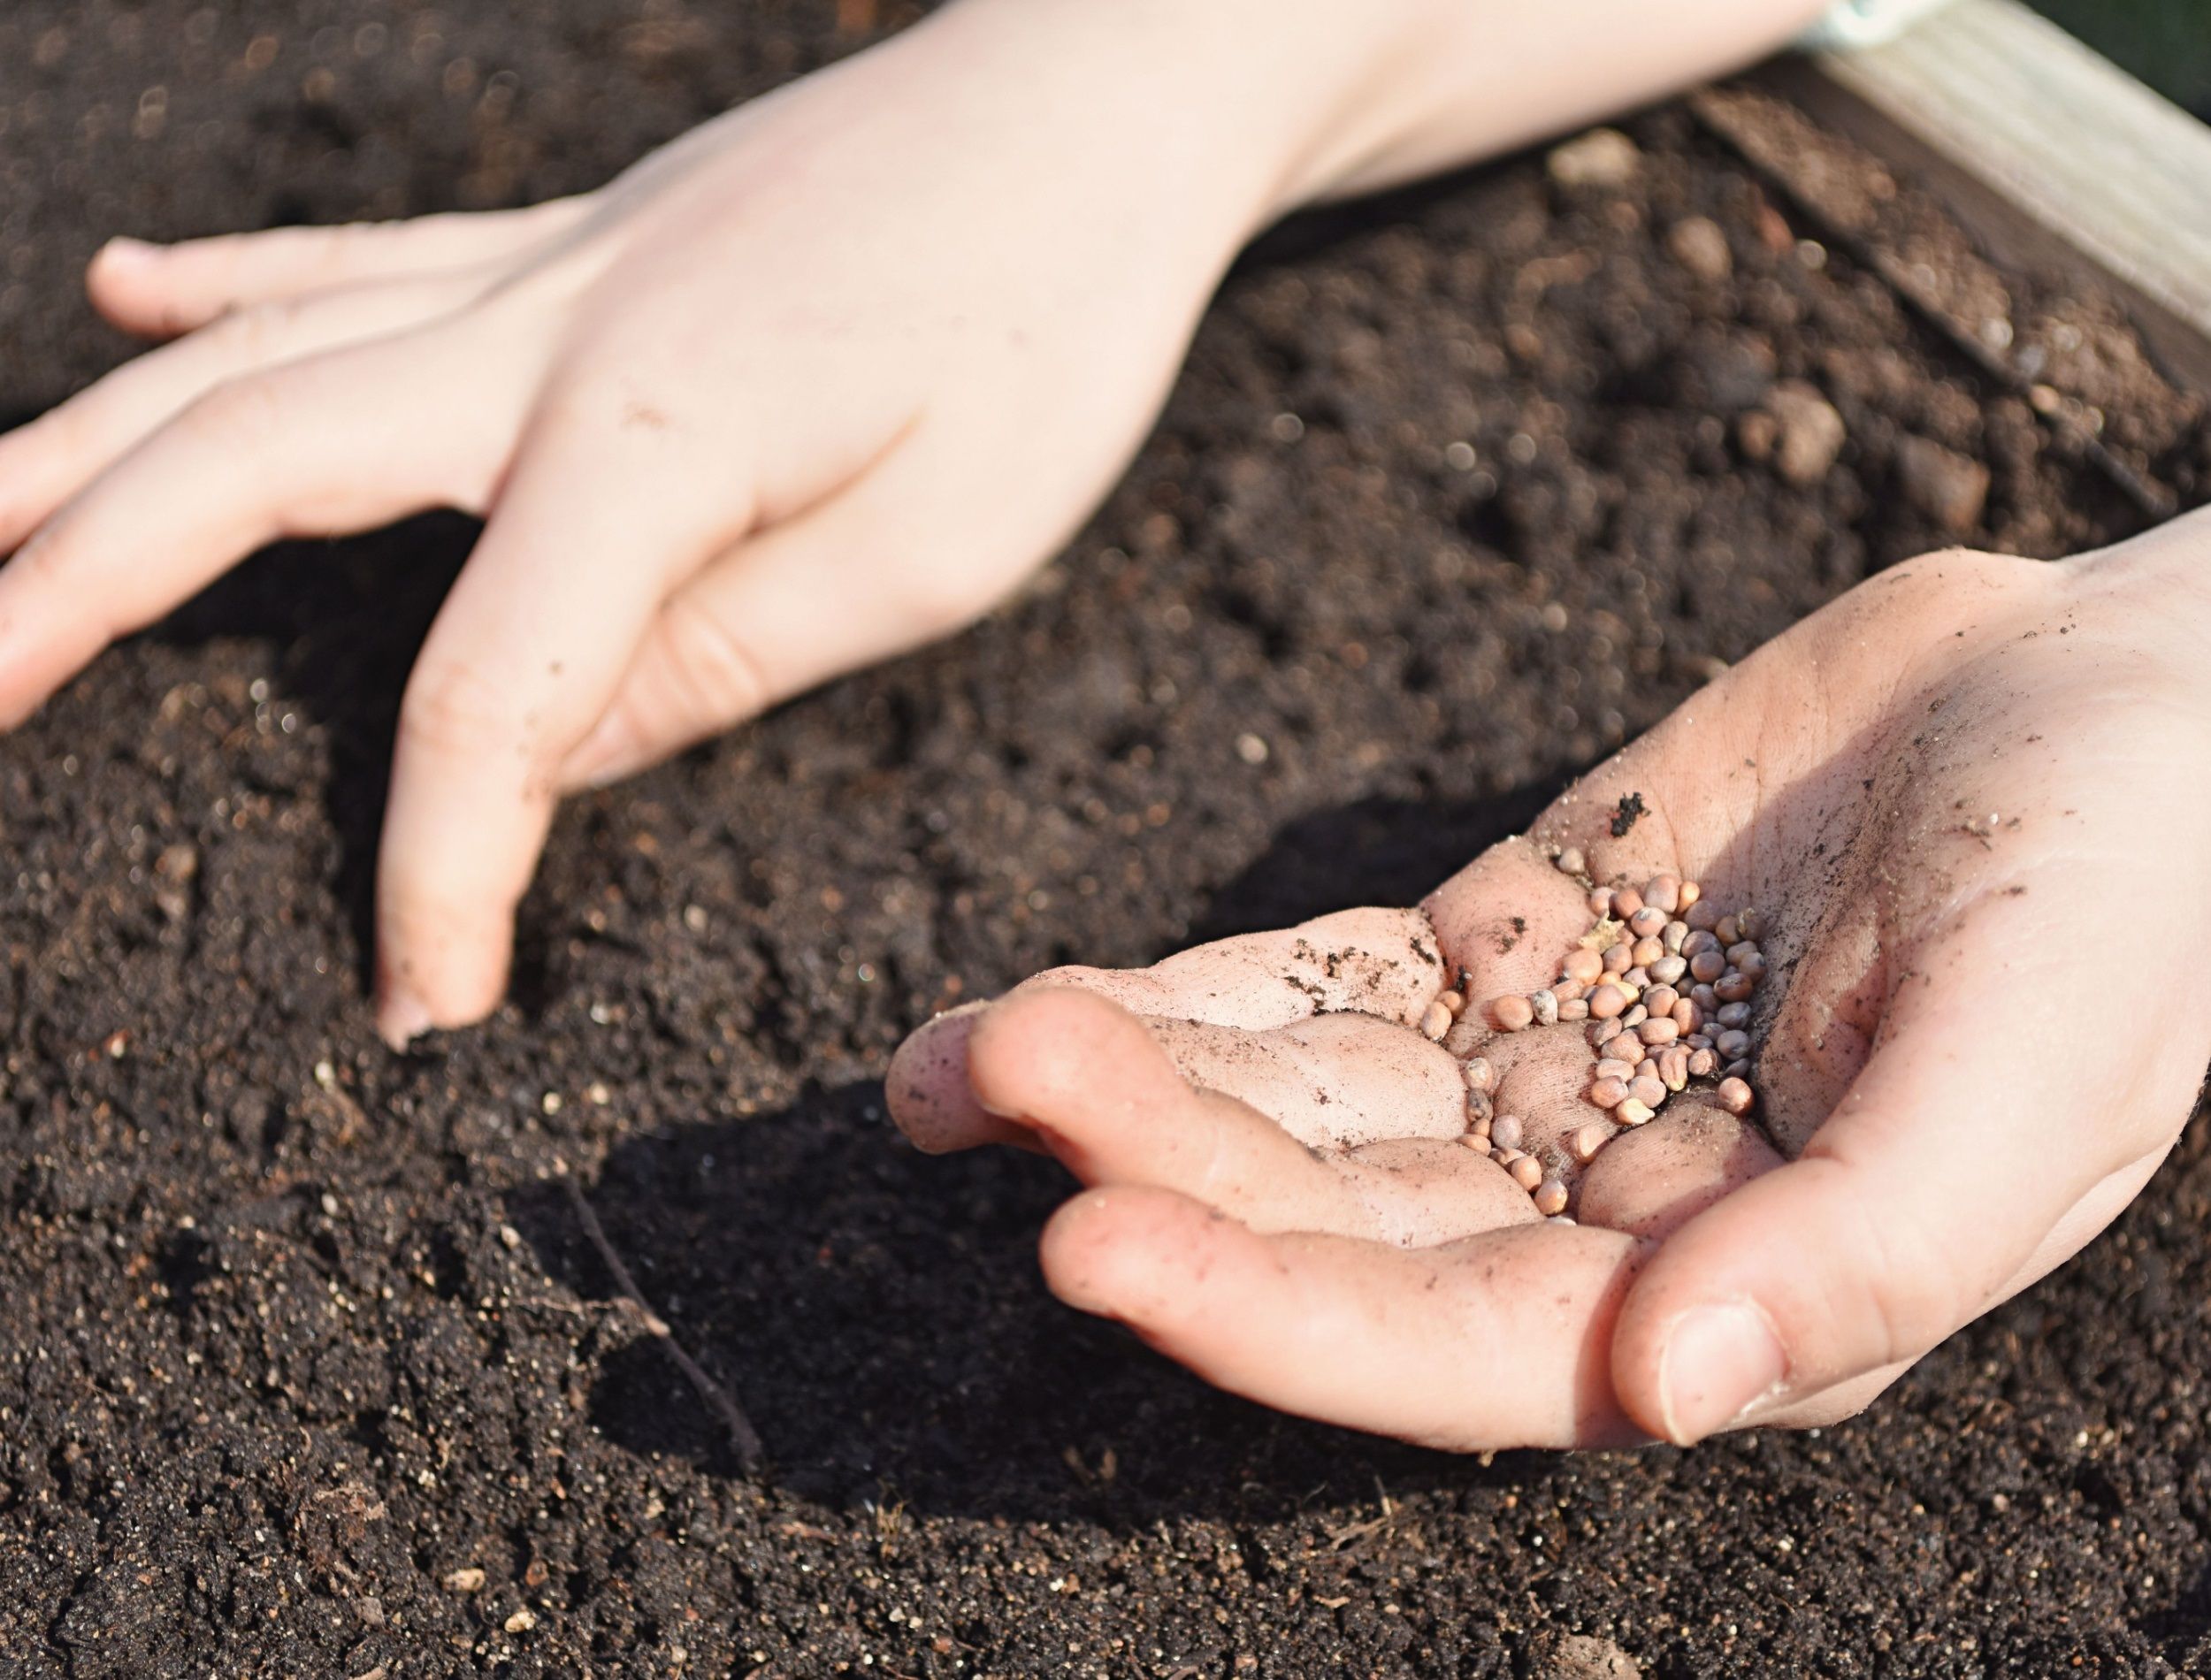 Young girl hands with seeds, planting radish seeds in soil outdoor on sunny day, close up view.